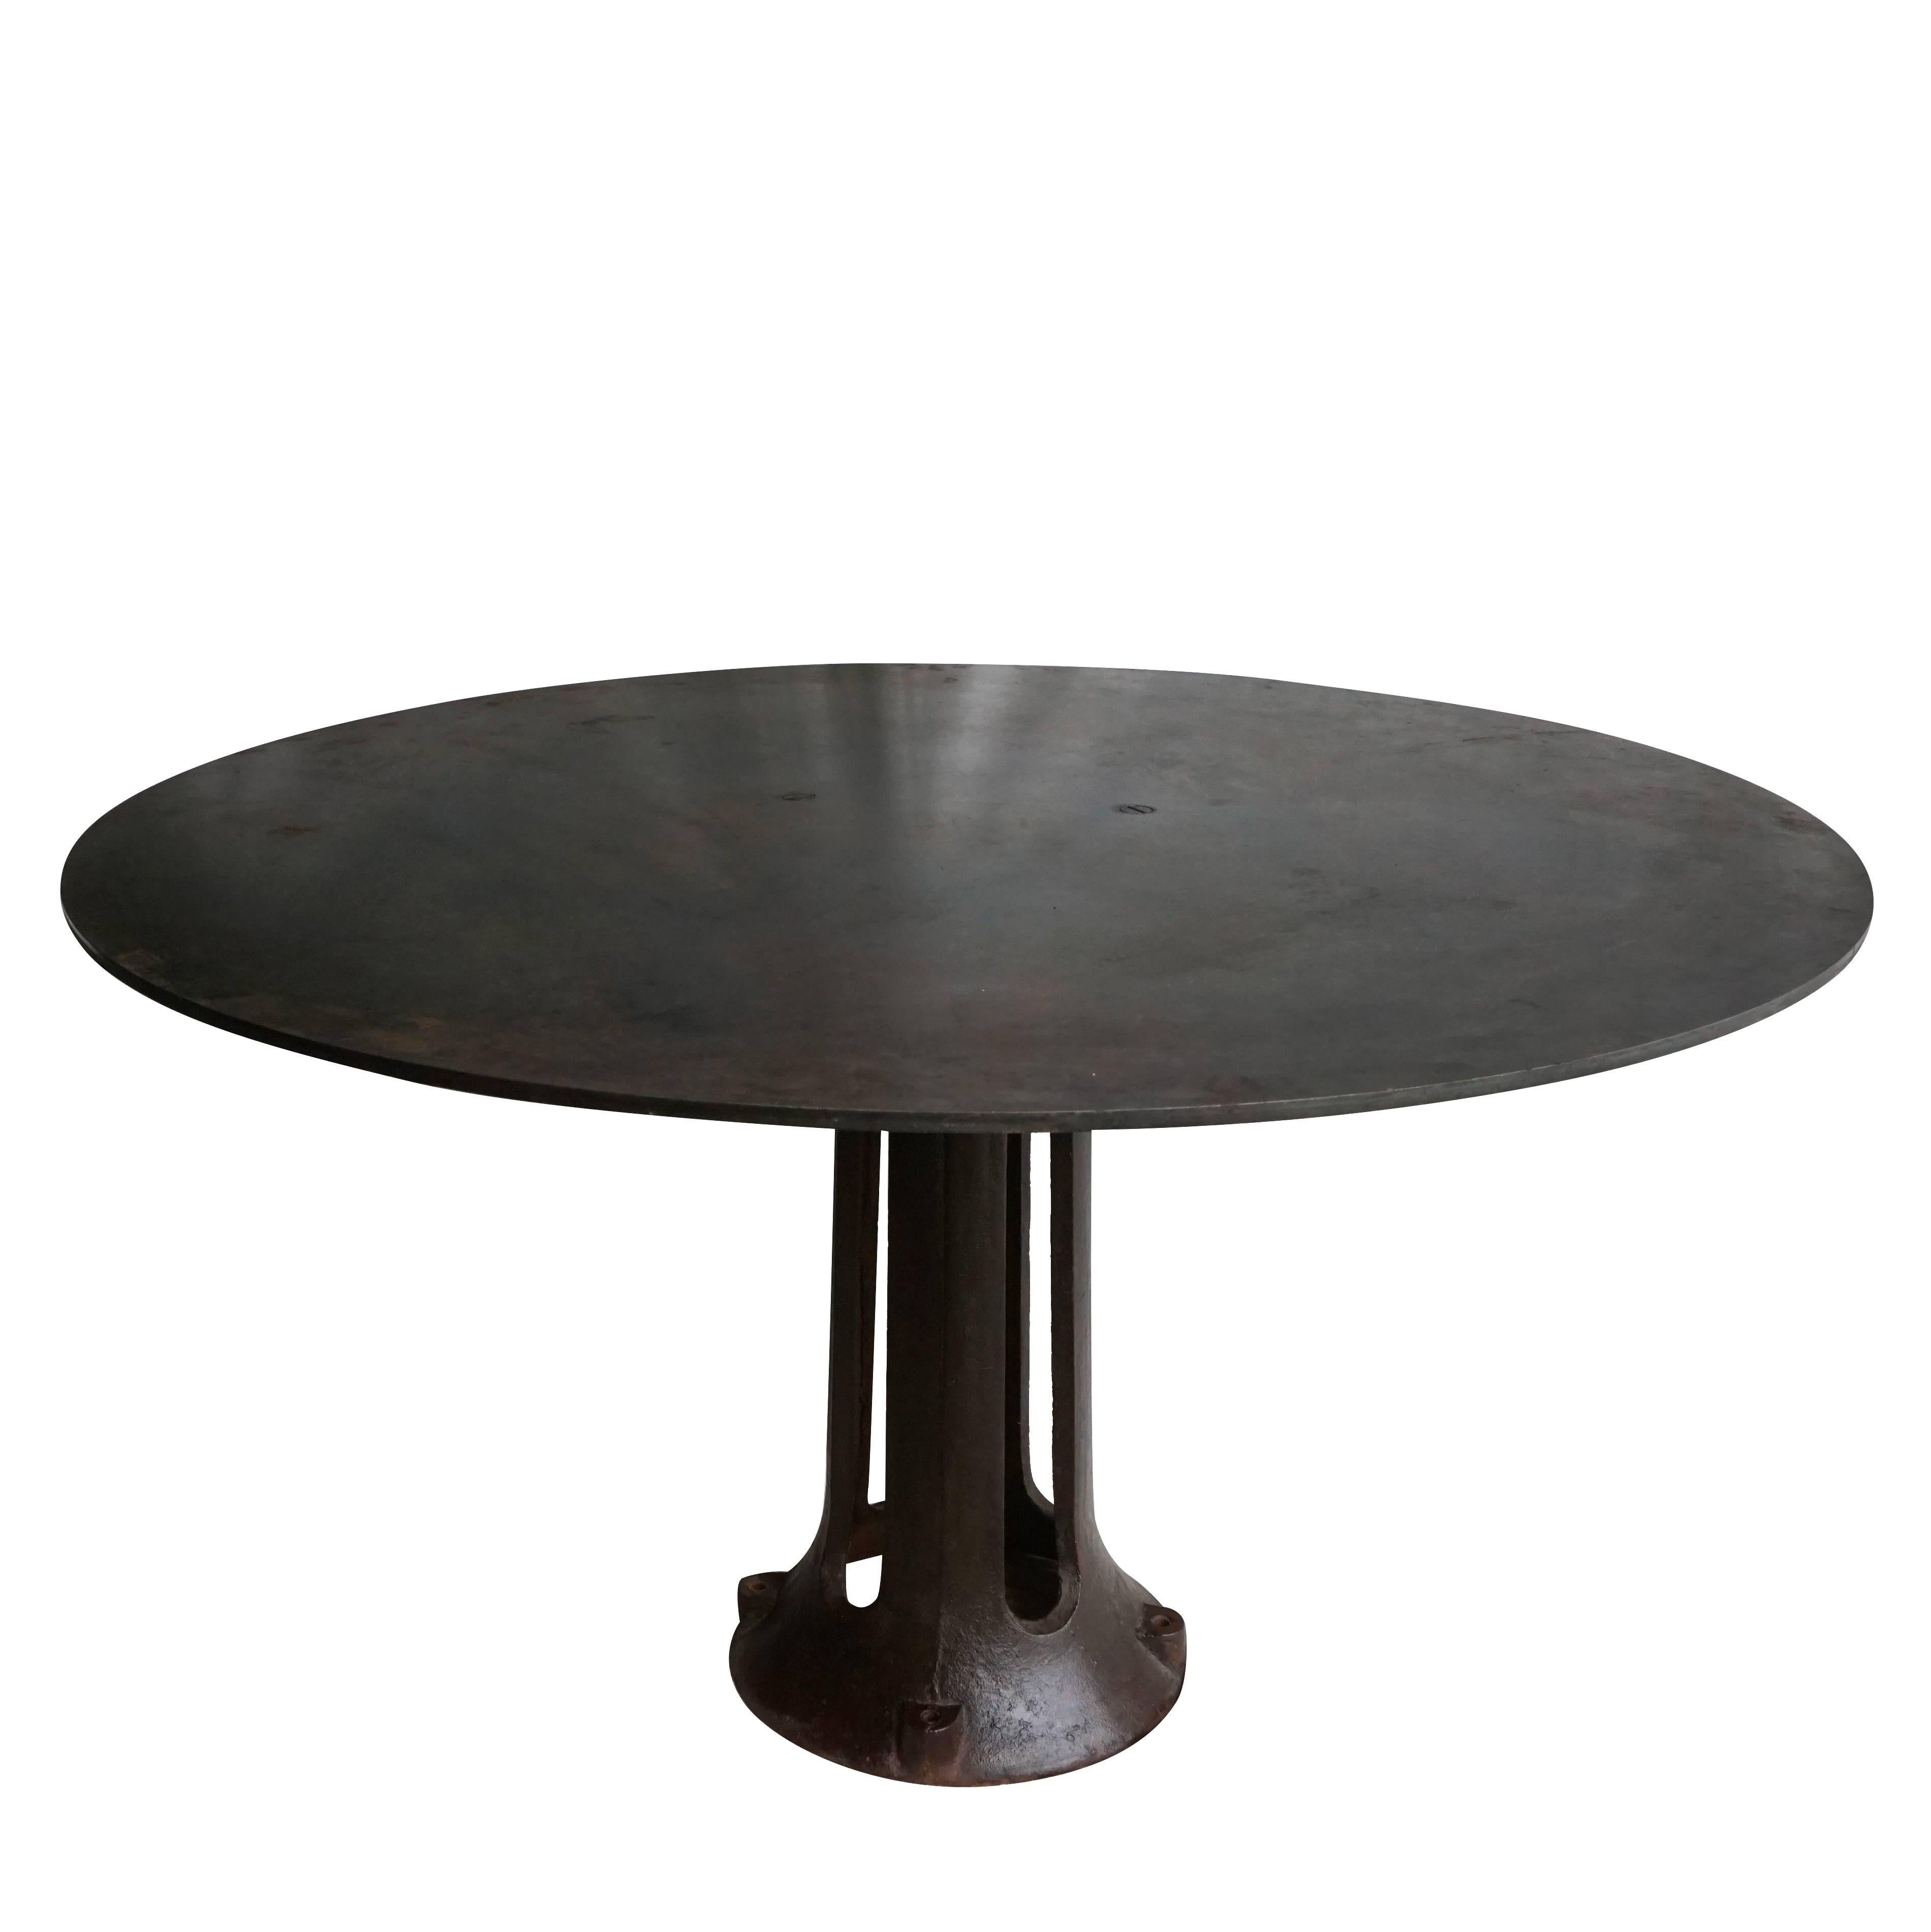 A round French industrial table on a round heavy tapered base made of cast iron with a distressed round table top in metal, circa 1920 France.